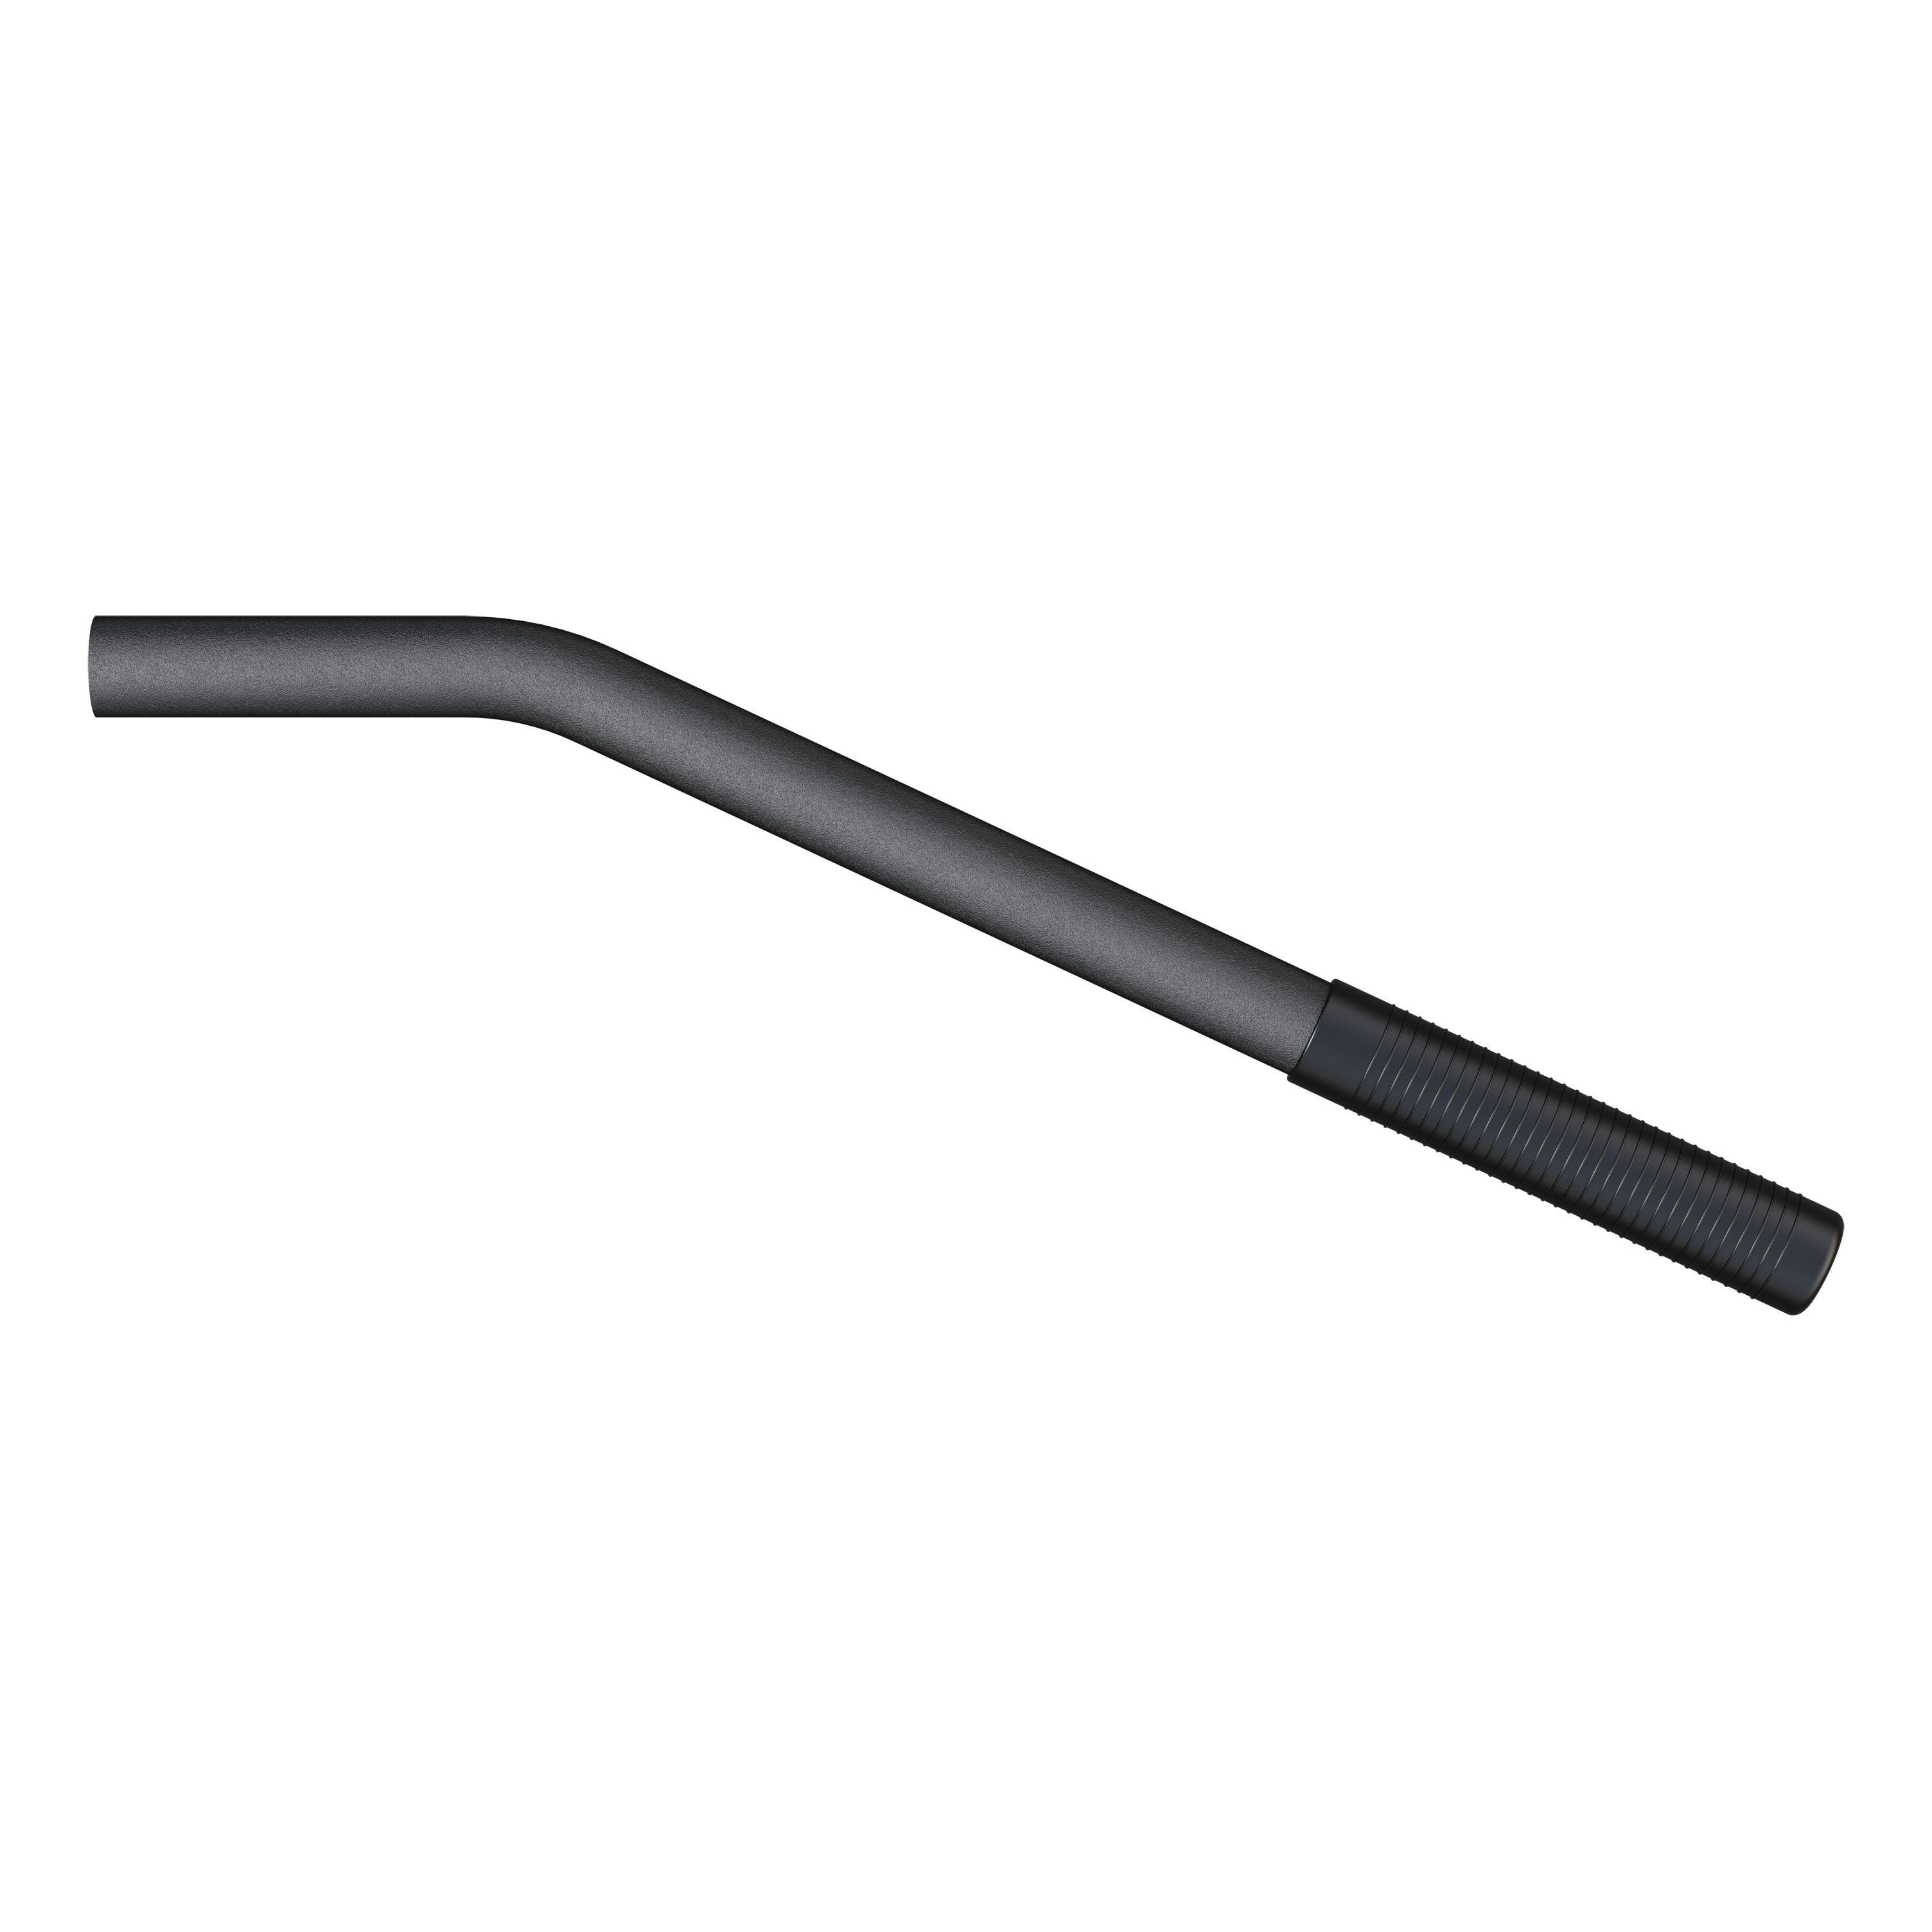 CURT 17112 Weight Distribution Lift Handle